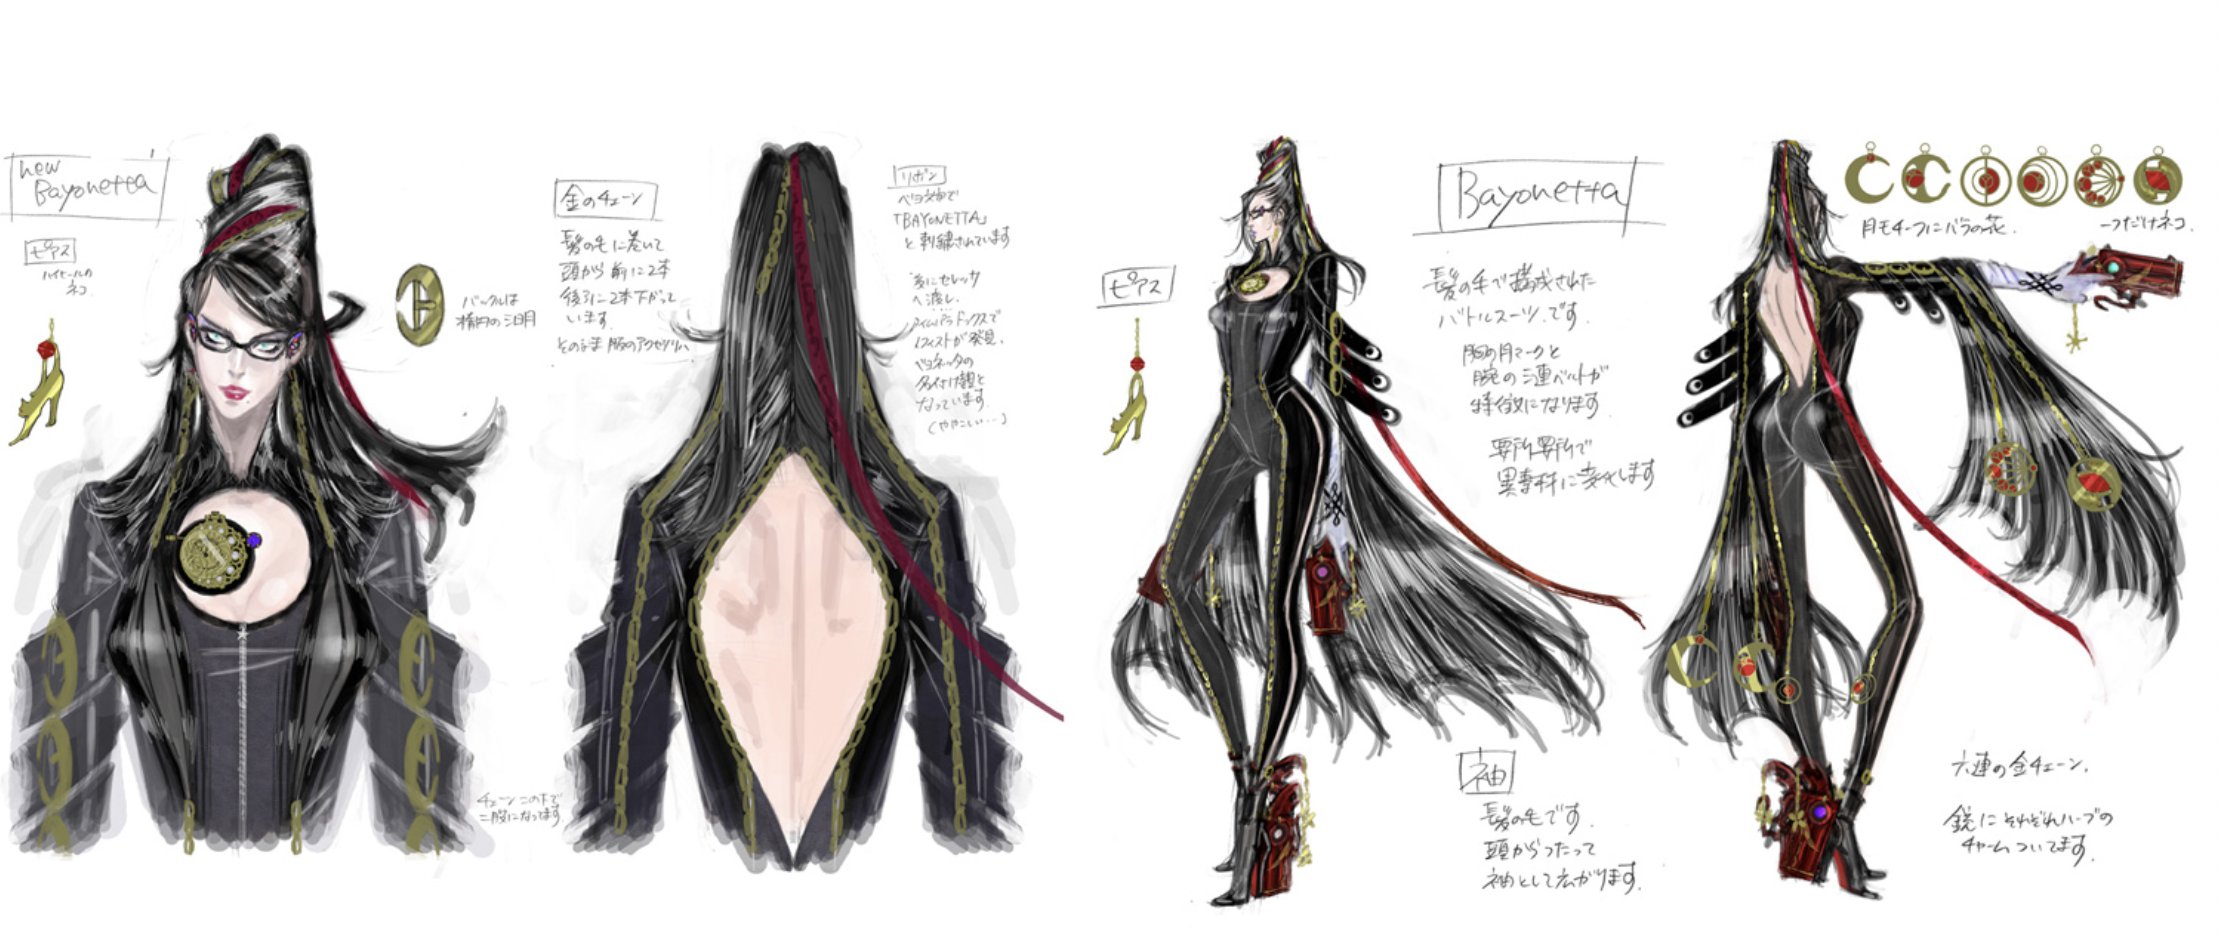 Bayonetta 2 Moderated Sexual Content With Intelligence and Humor